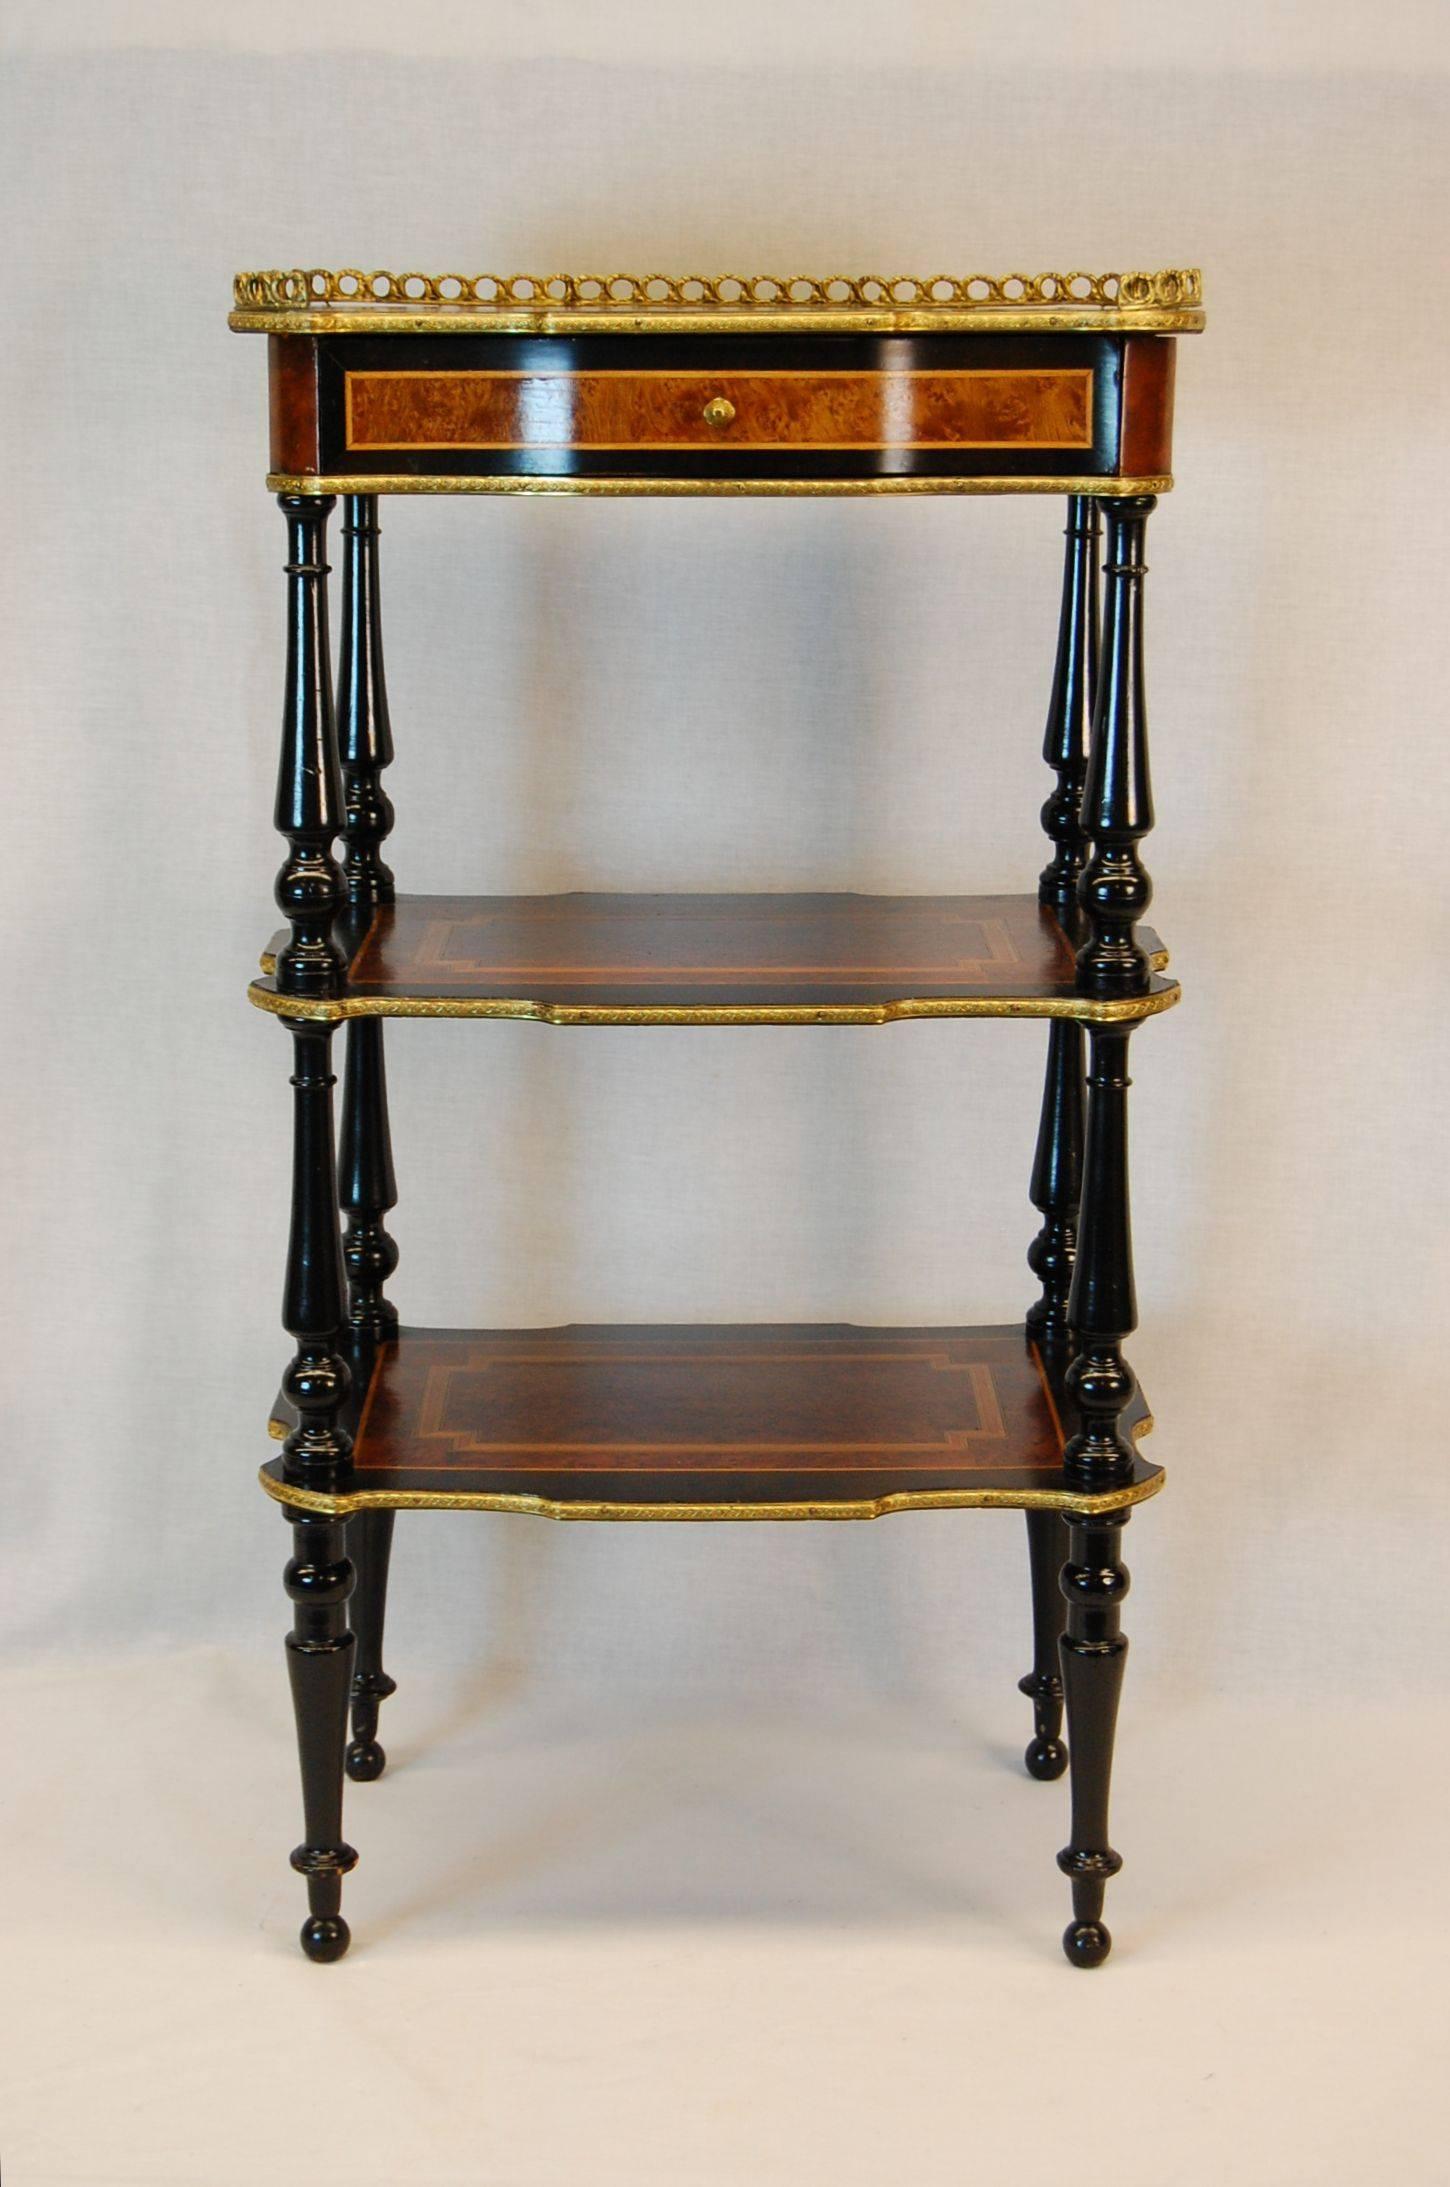 Ormolu galleried and trimmed triple-tiered table with turned ebonized legs. Complex veneers, bandings and inlays of burl, rosewood and satinwood. 